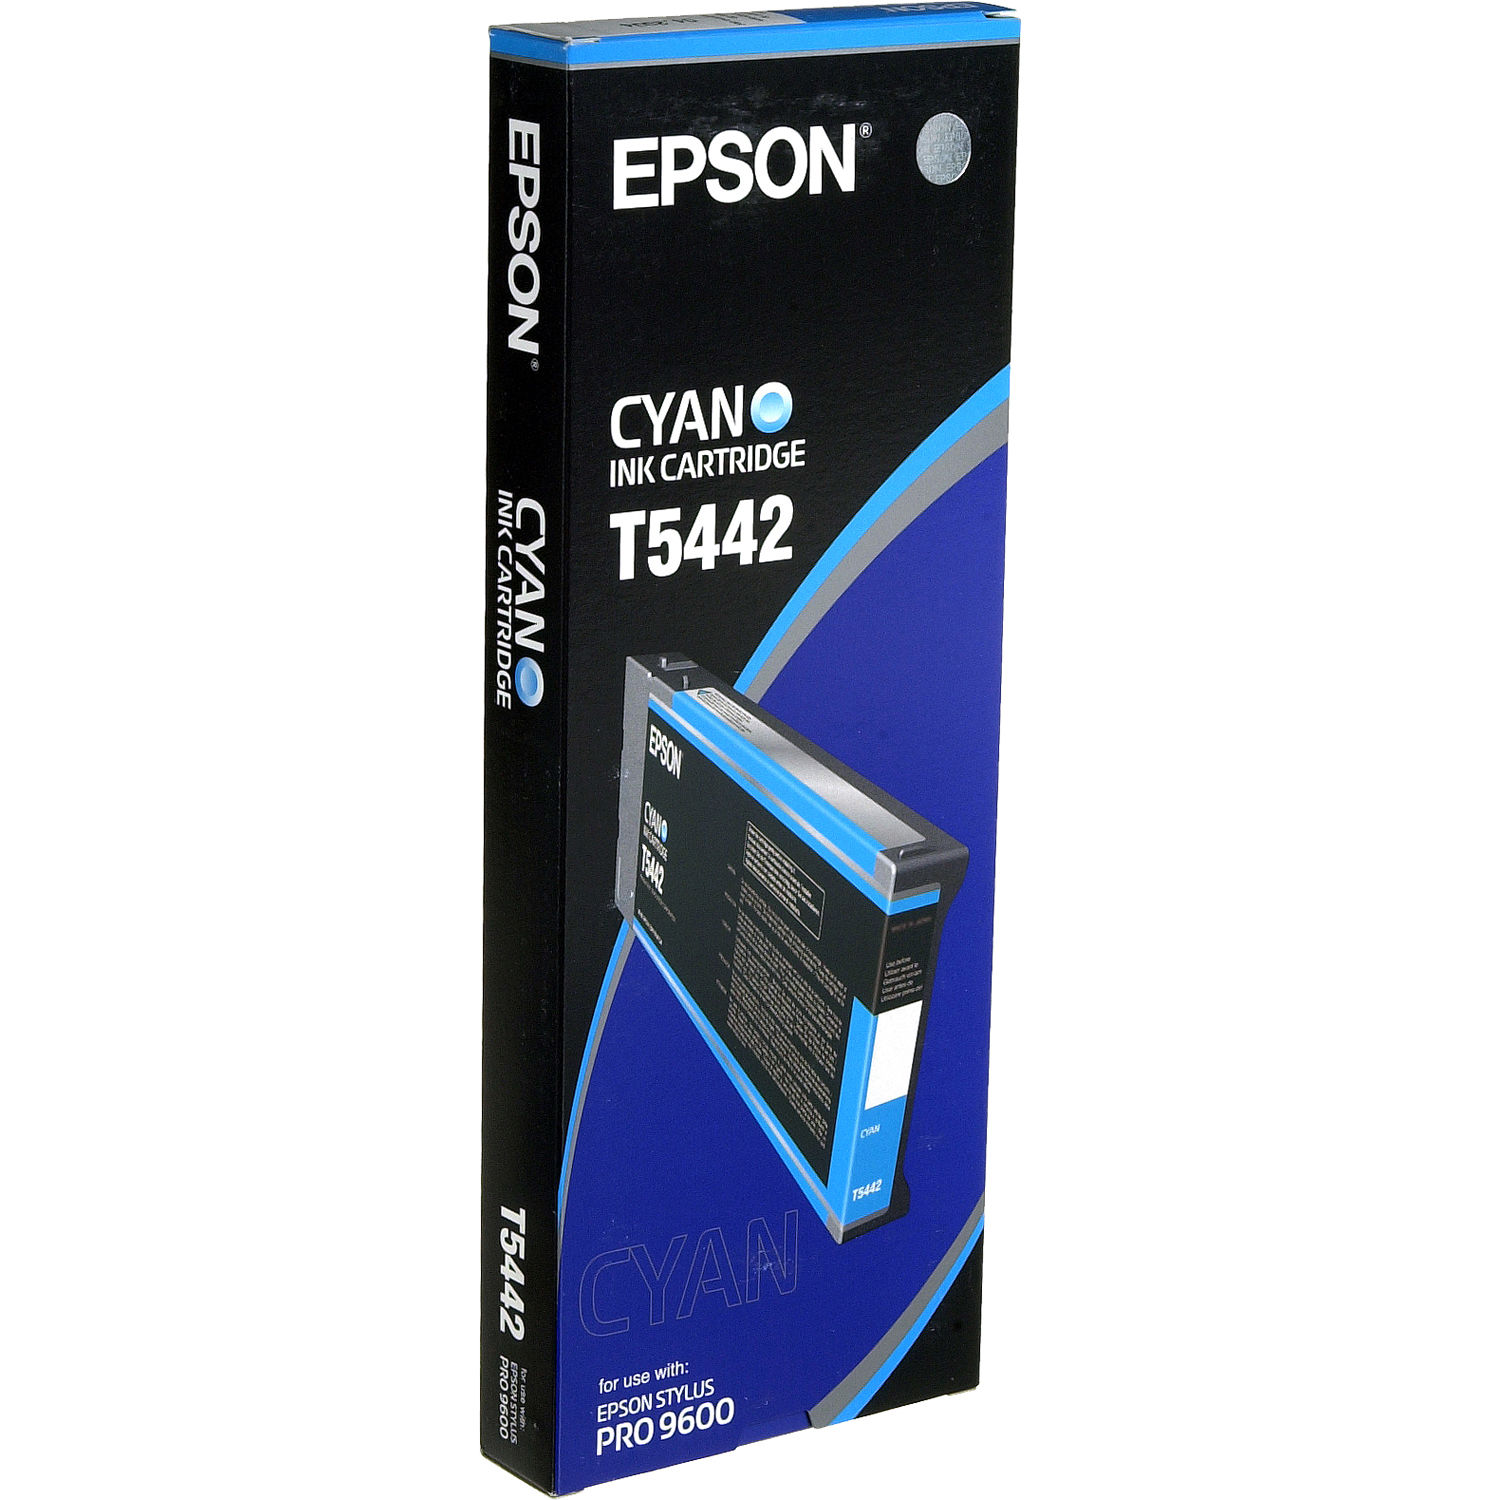 Compatible T544200/ C13T544200 Cyan high yield cartridge for Epson Stylus Pro 4000/ 4400/ 7600/ 9600